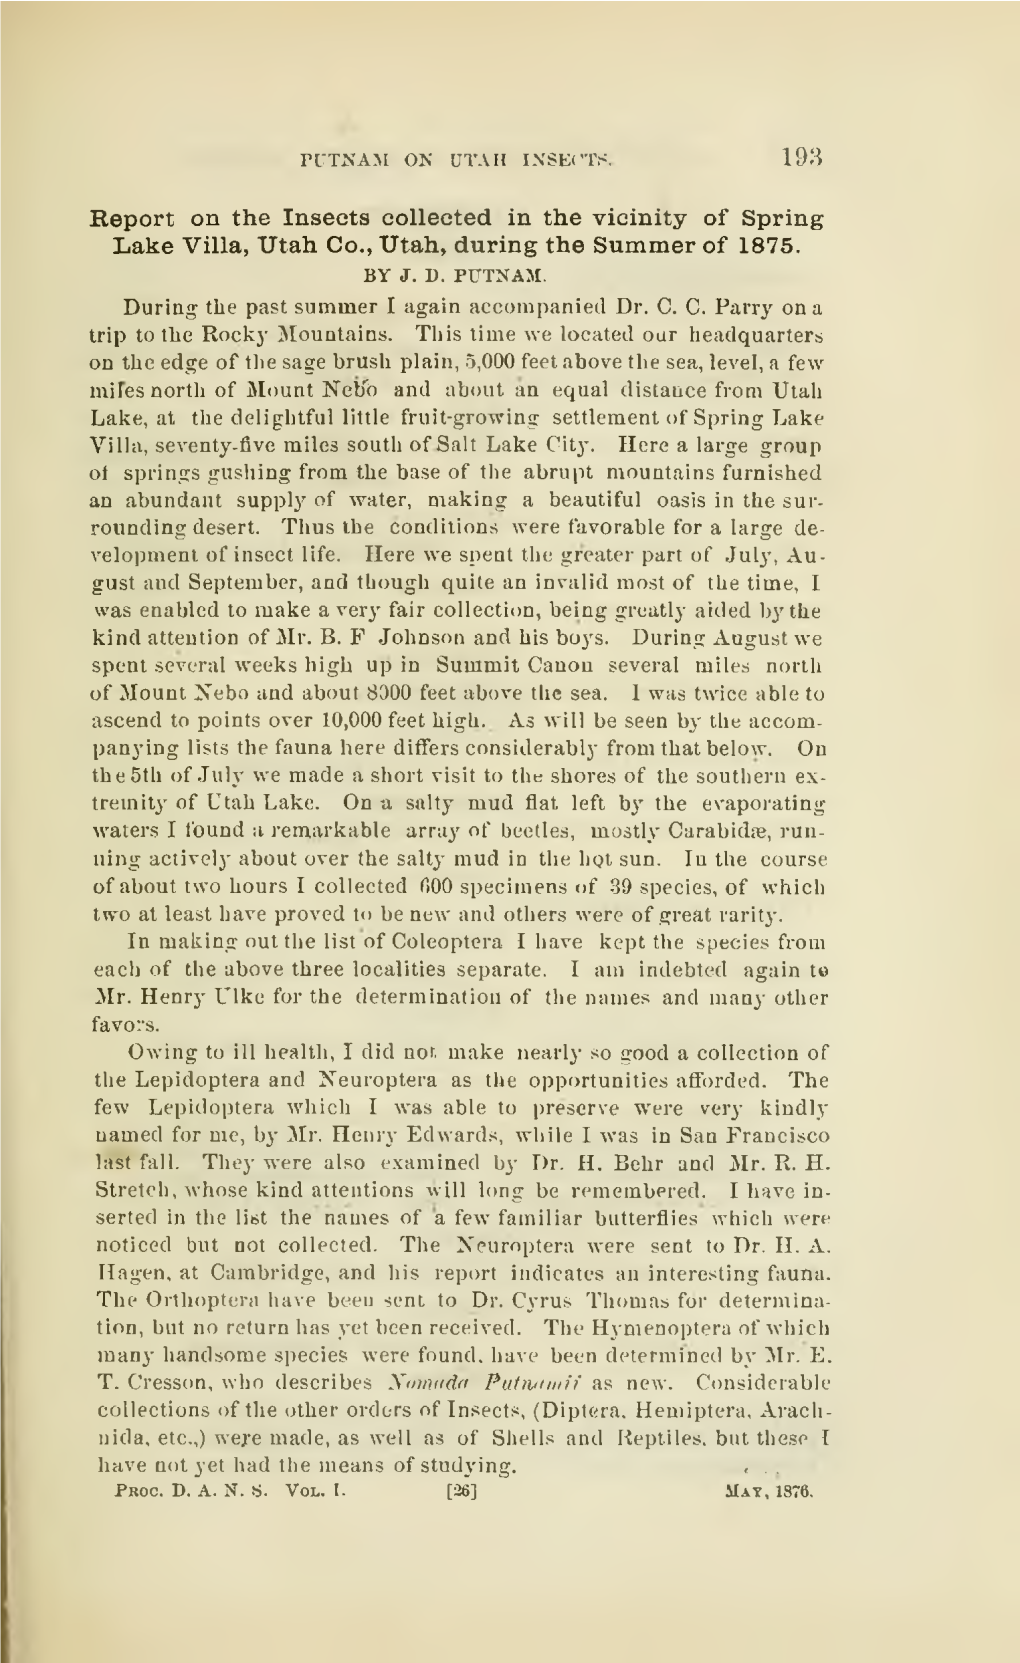 Report on the Insects Collected in the Vicinity of Spring Lake Villa, Utah Co., Utah, During the Summer of 1875. by J